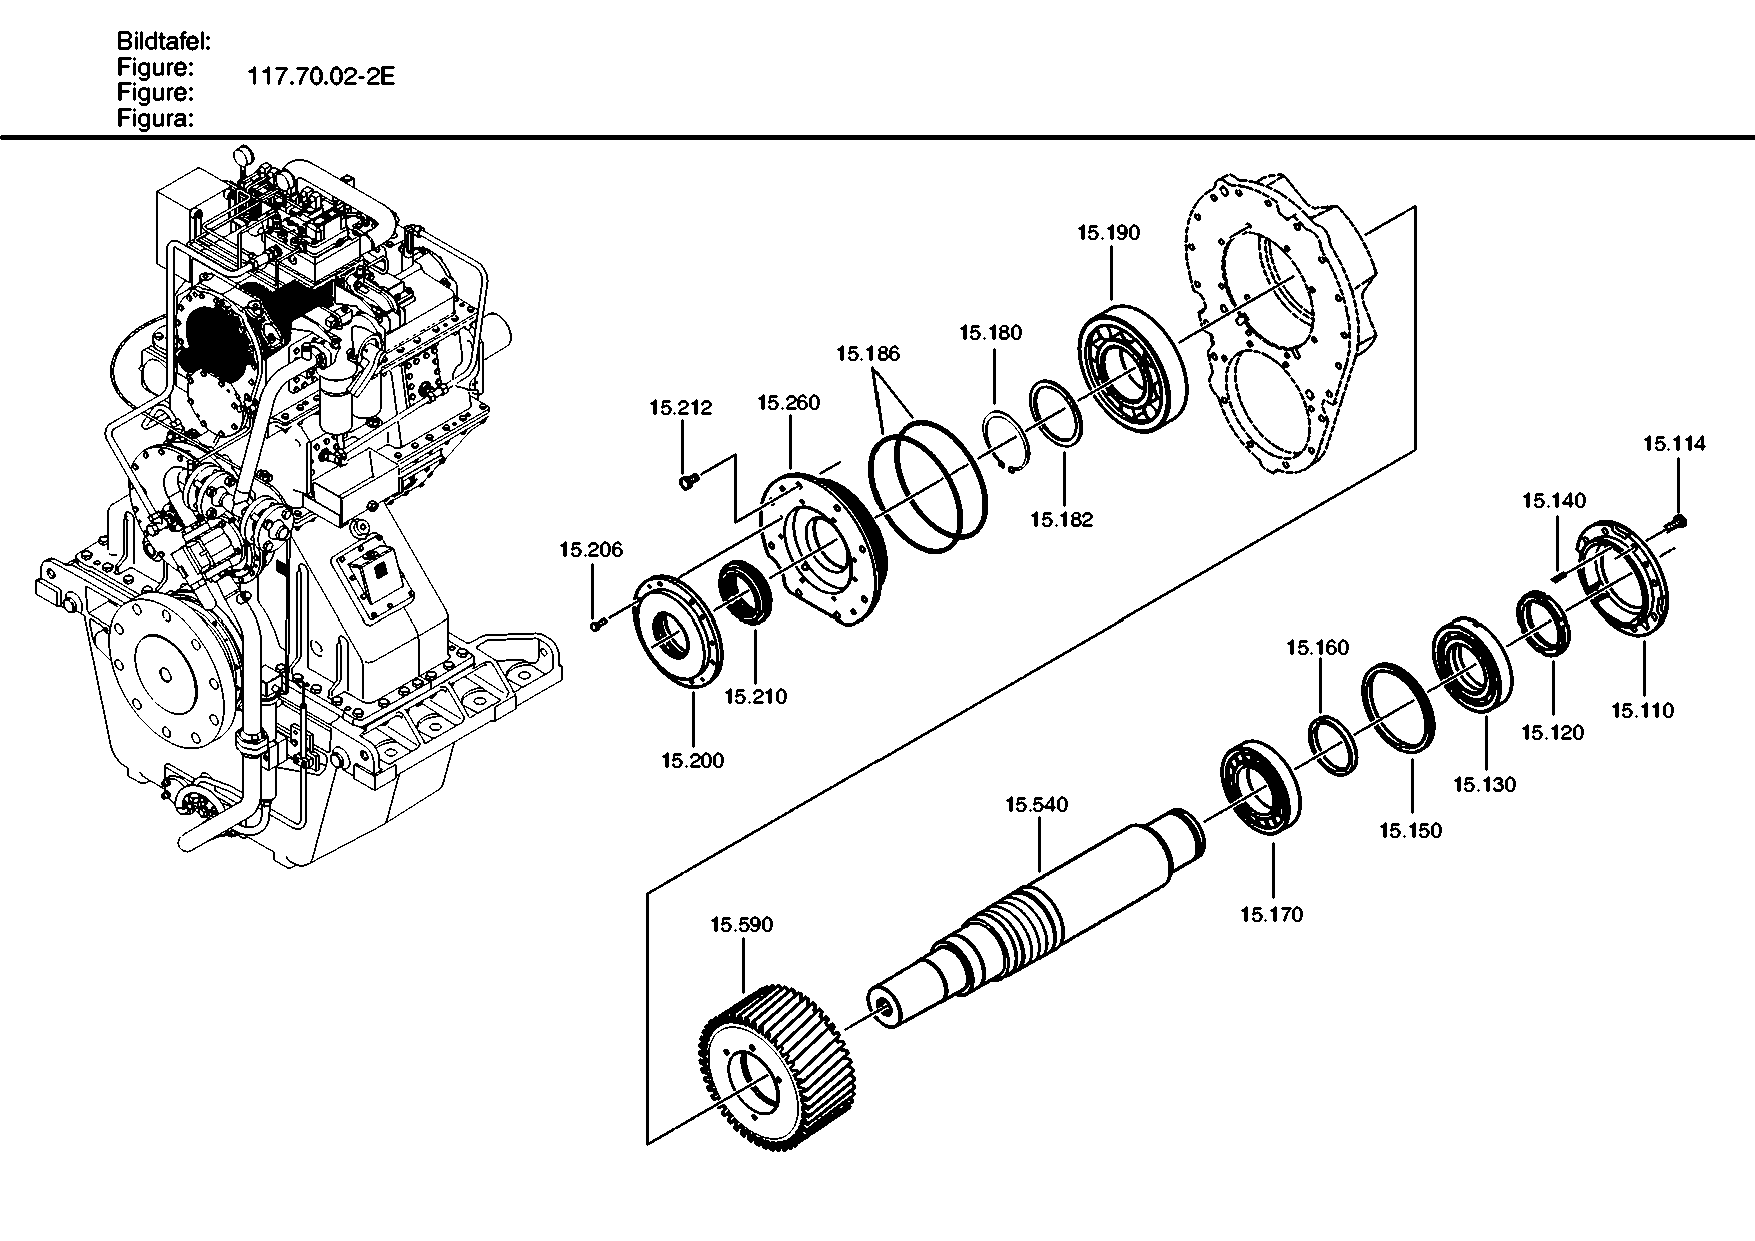 drawing for E. N. M. T. P. / CPG 0634 304 243 - O-RING (figure 2)